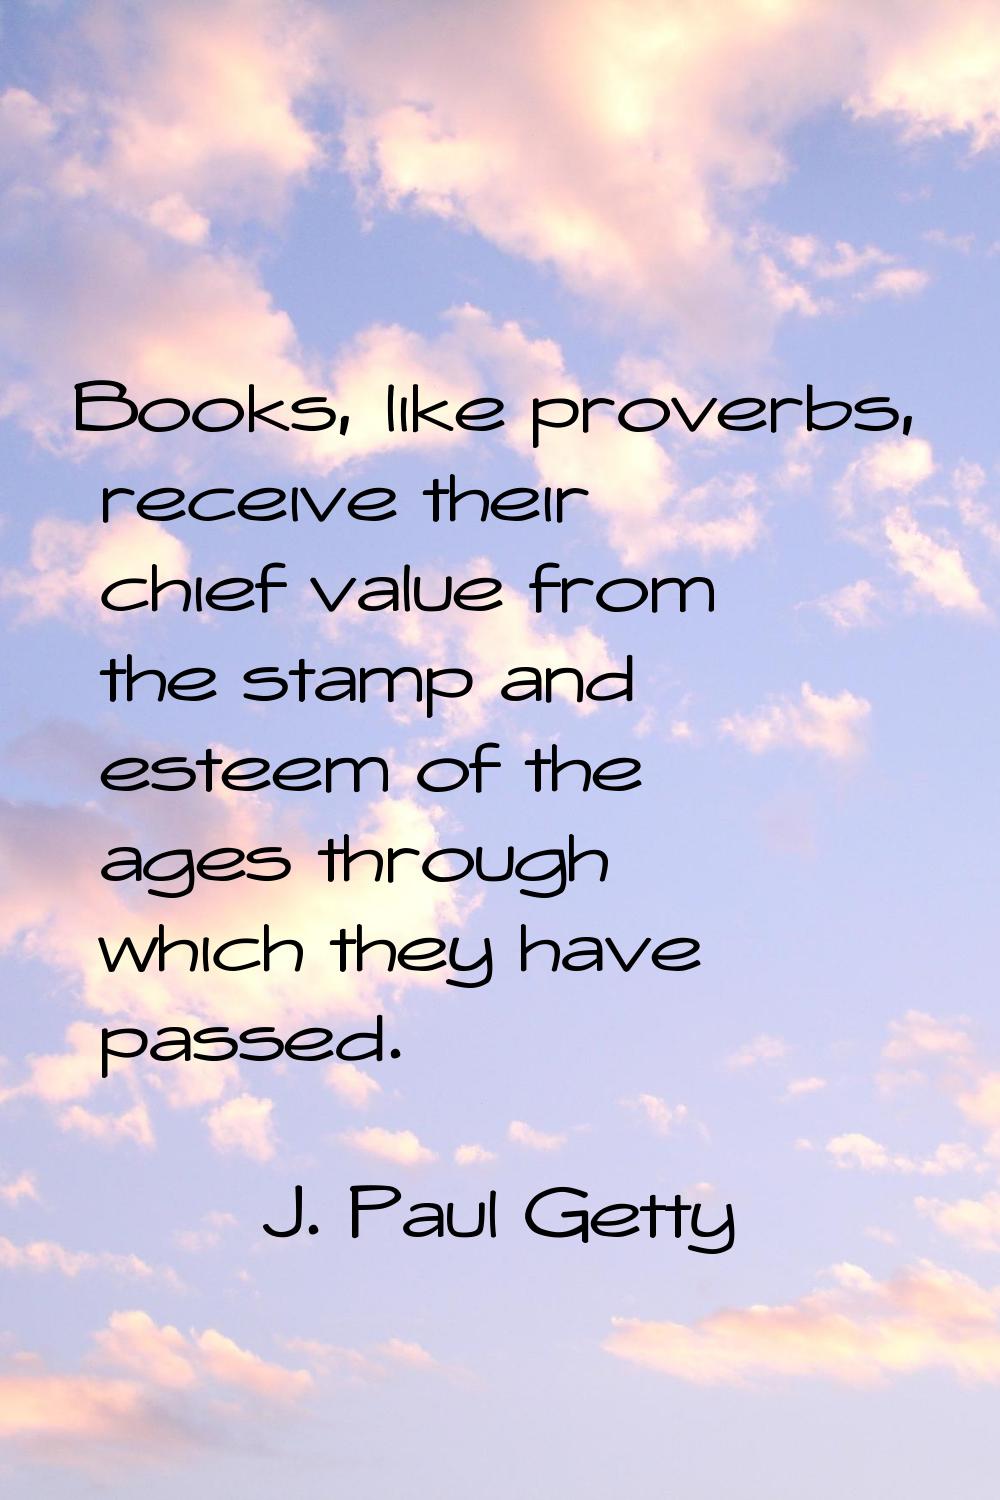 Books, like proverbs, receive their chief value from the stamp and esteem of the ages through which